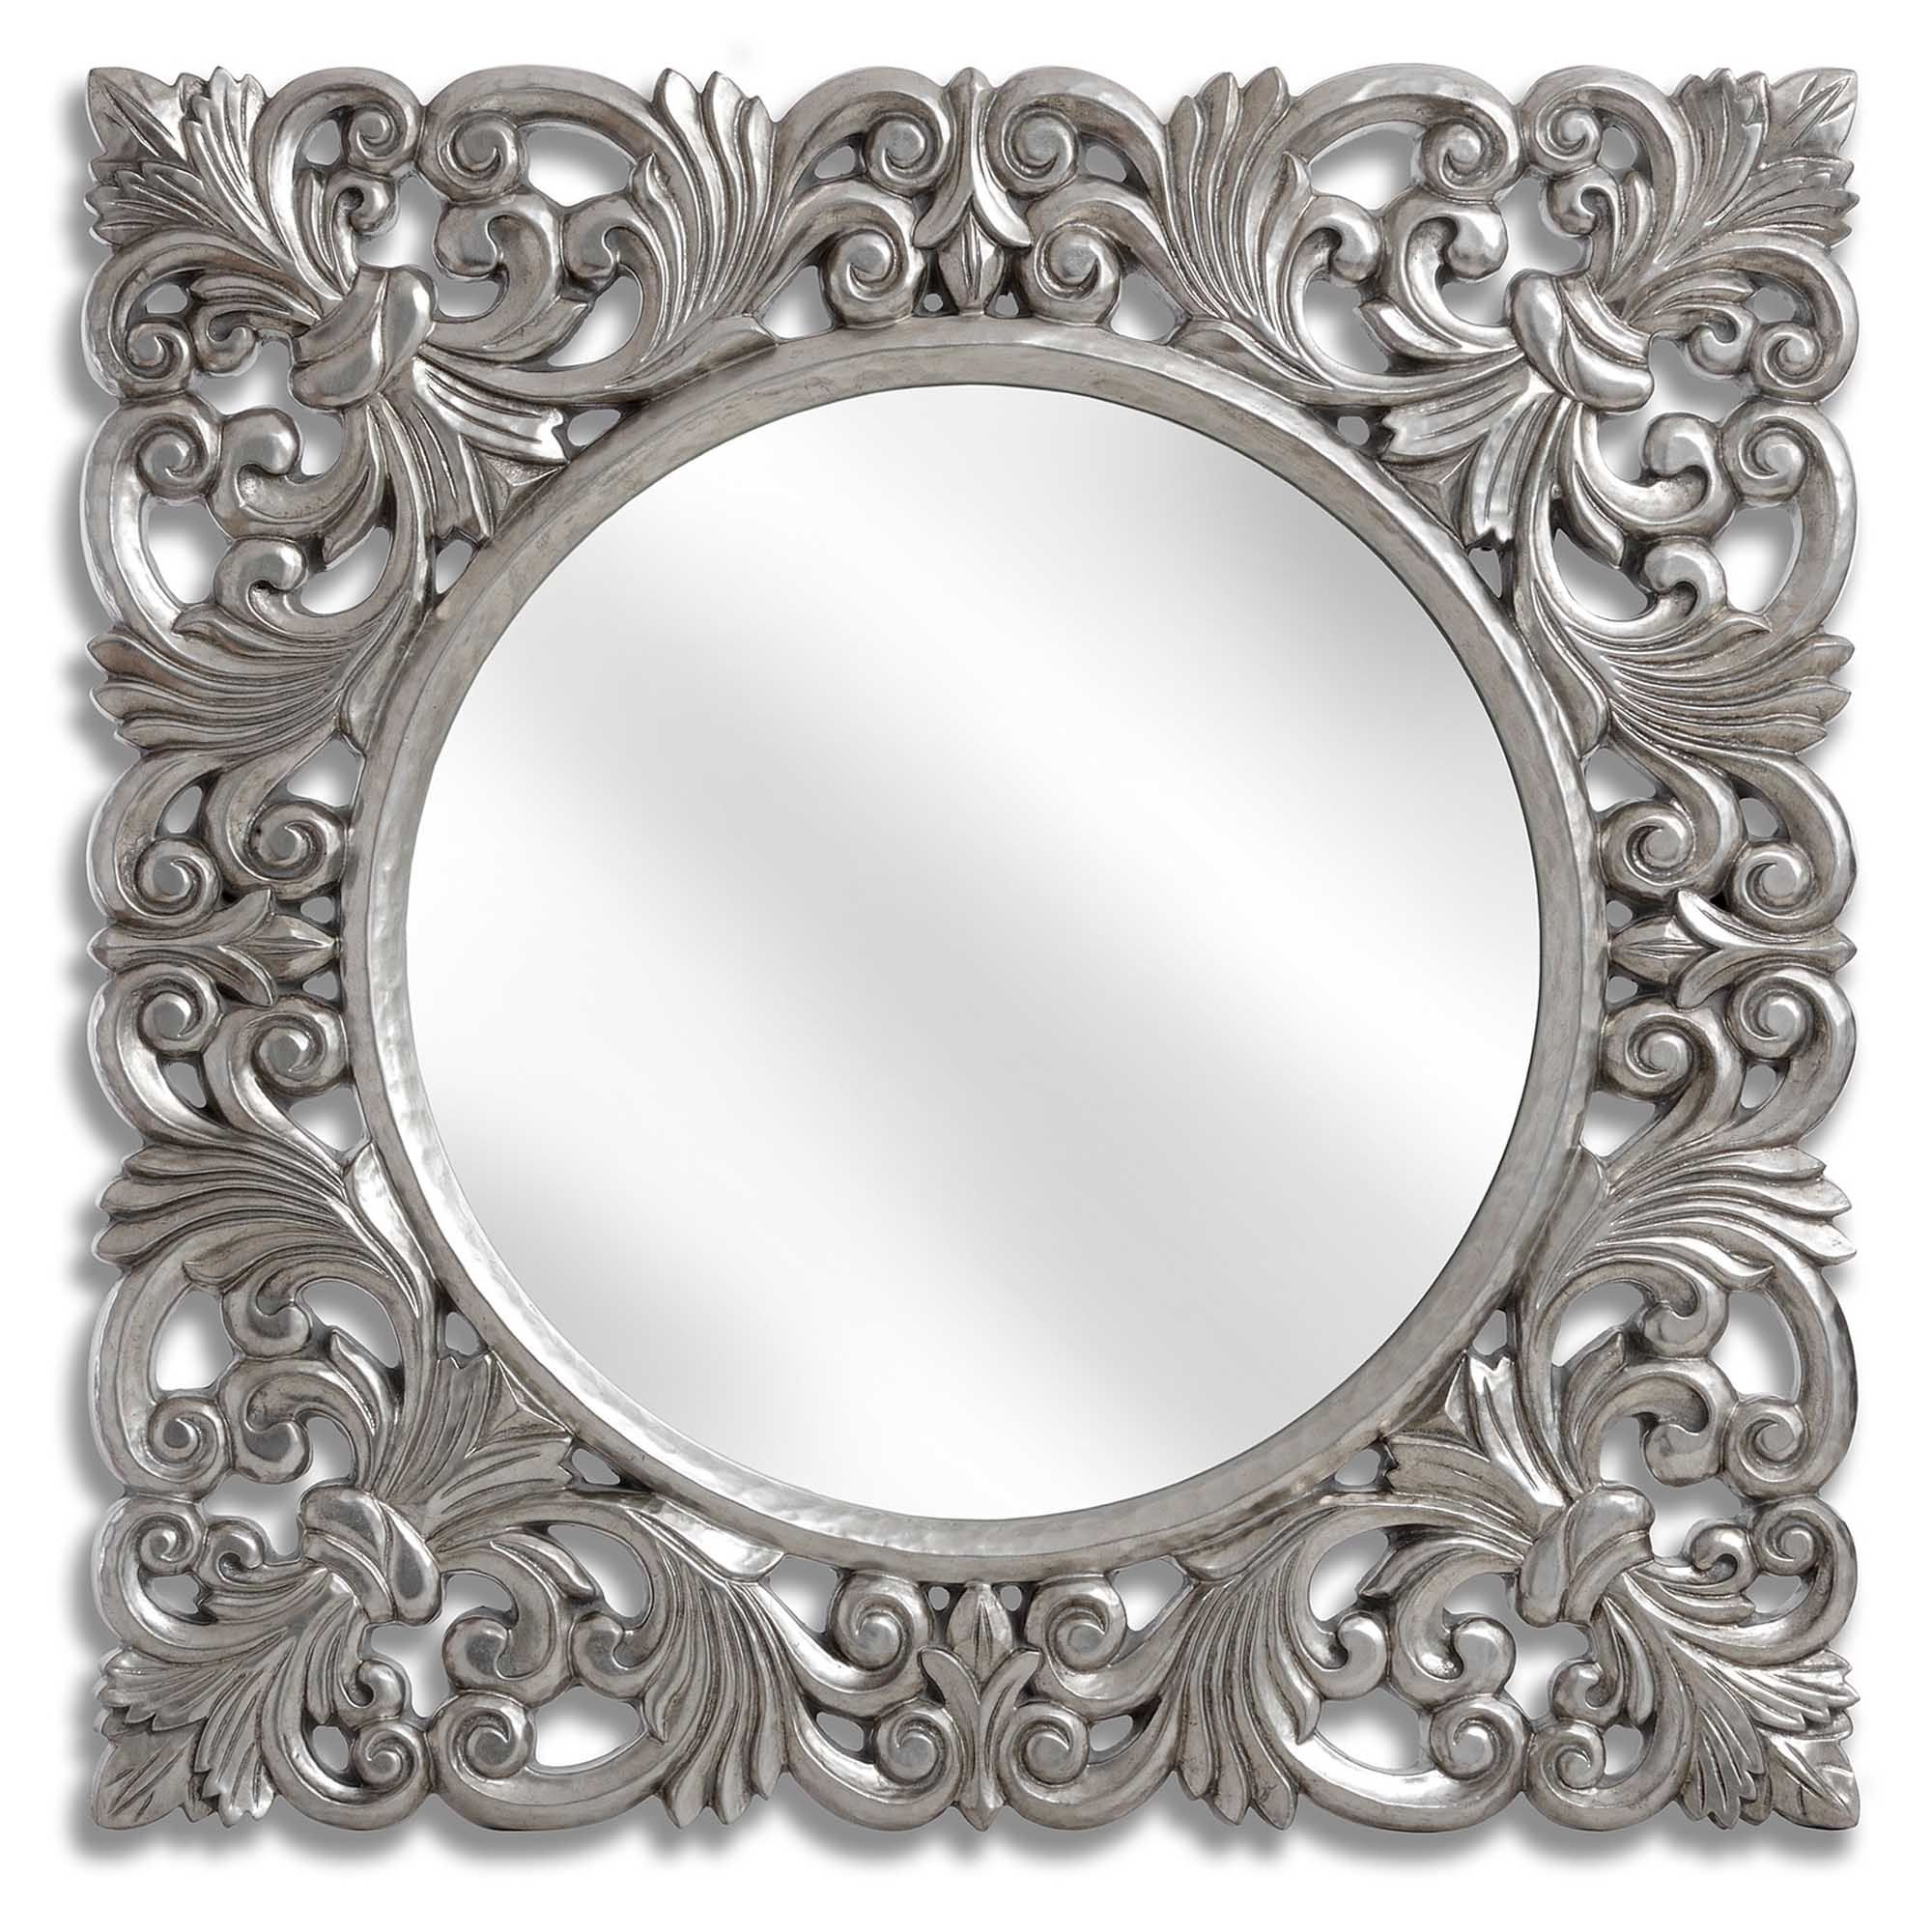 Widely Used Antiqued Glass Wall Mirrors Throughout Baroque Antique French Style Silver Wall Mirror (View 12 of 15)